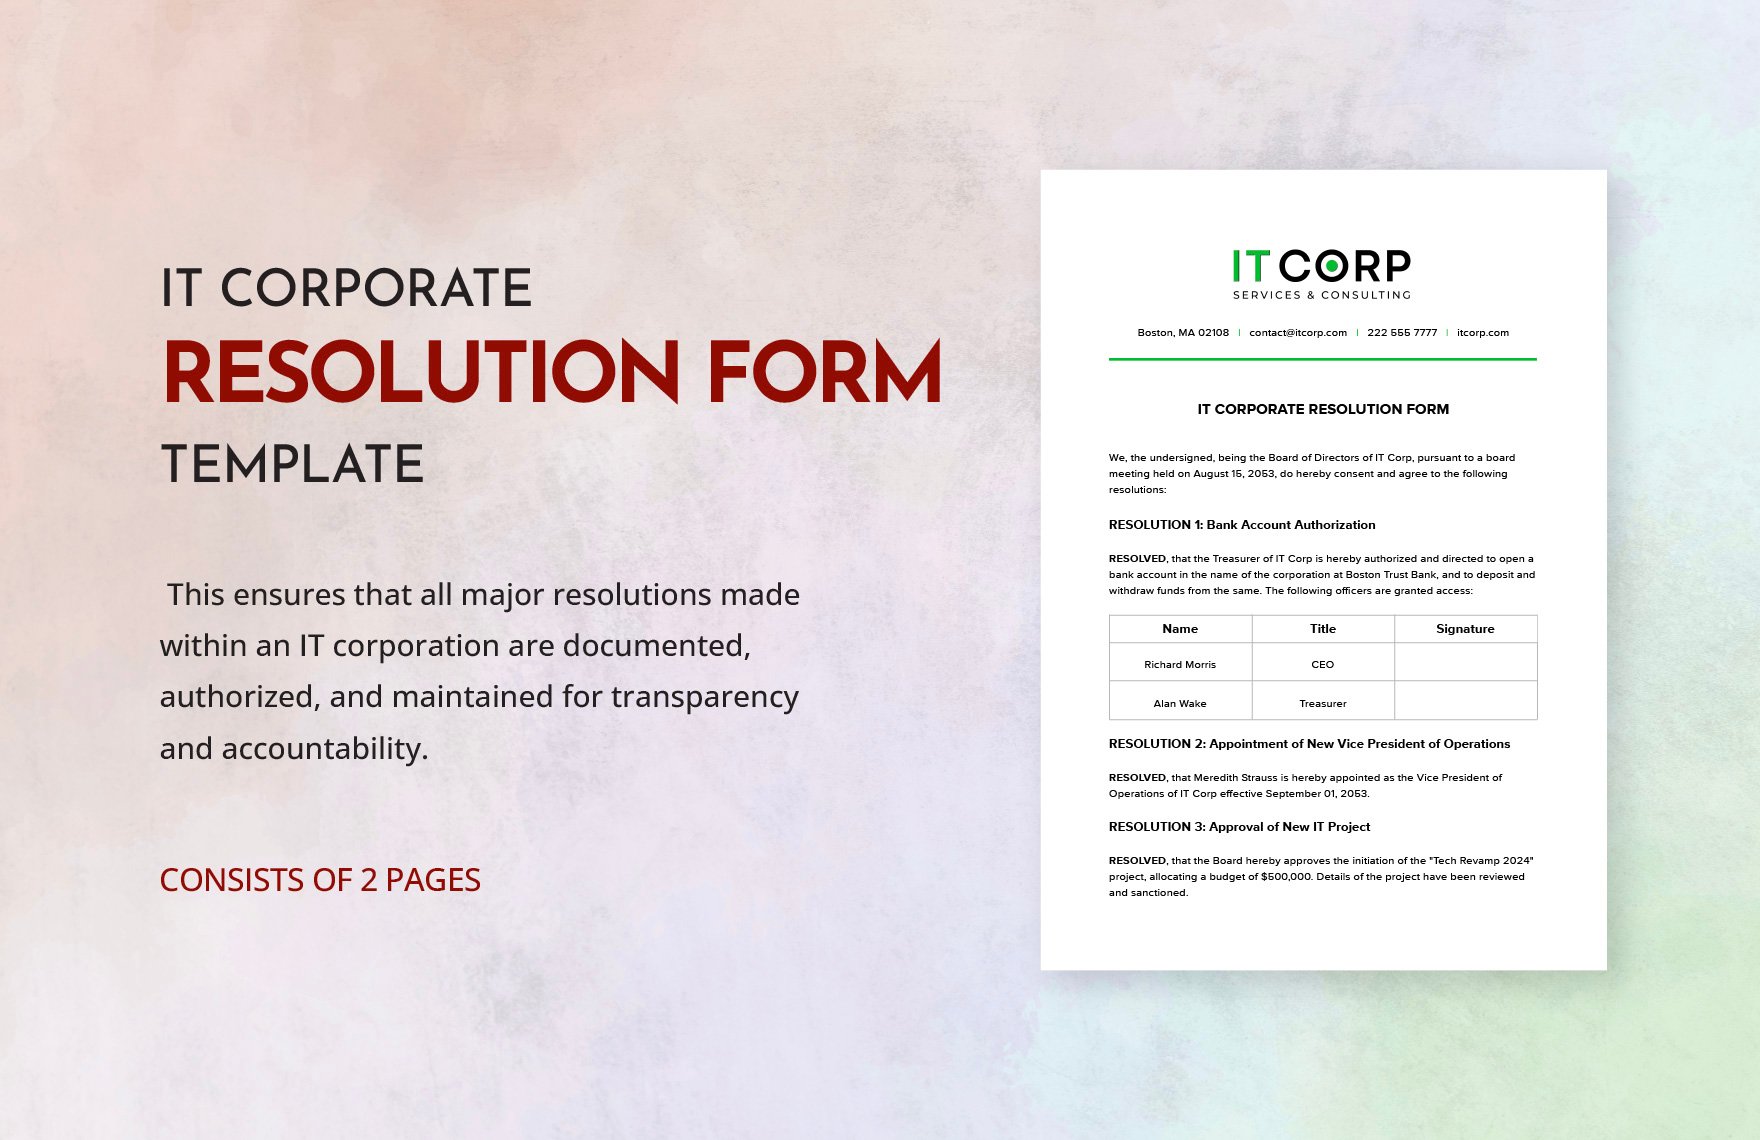 IT Corporate Resolution Form Template in Word, Google Docs, PDF